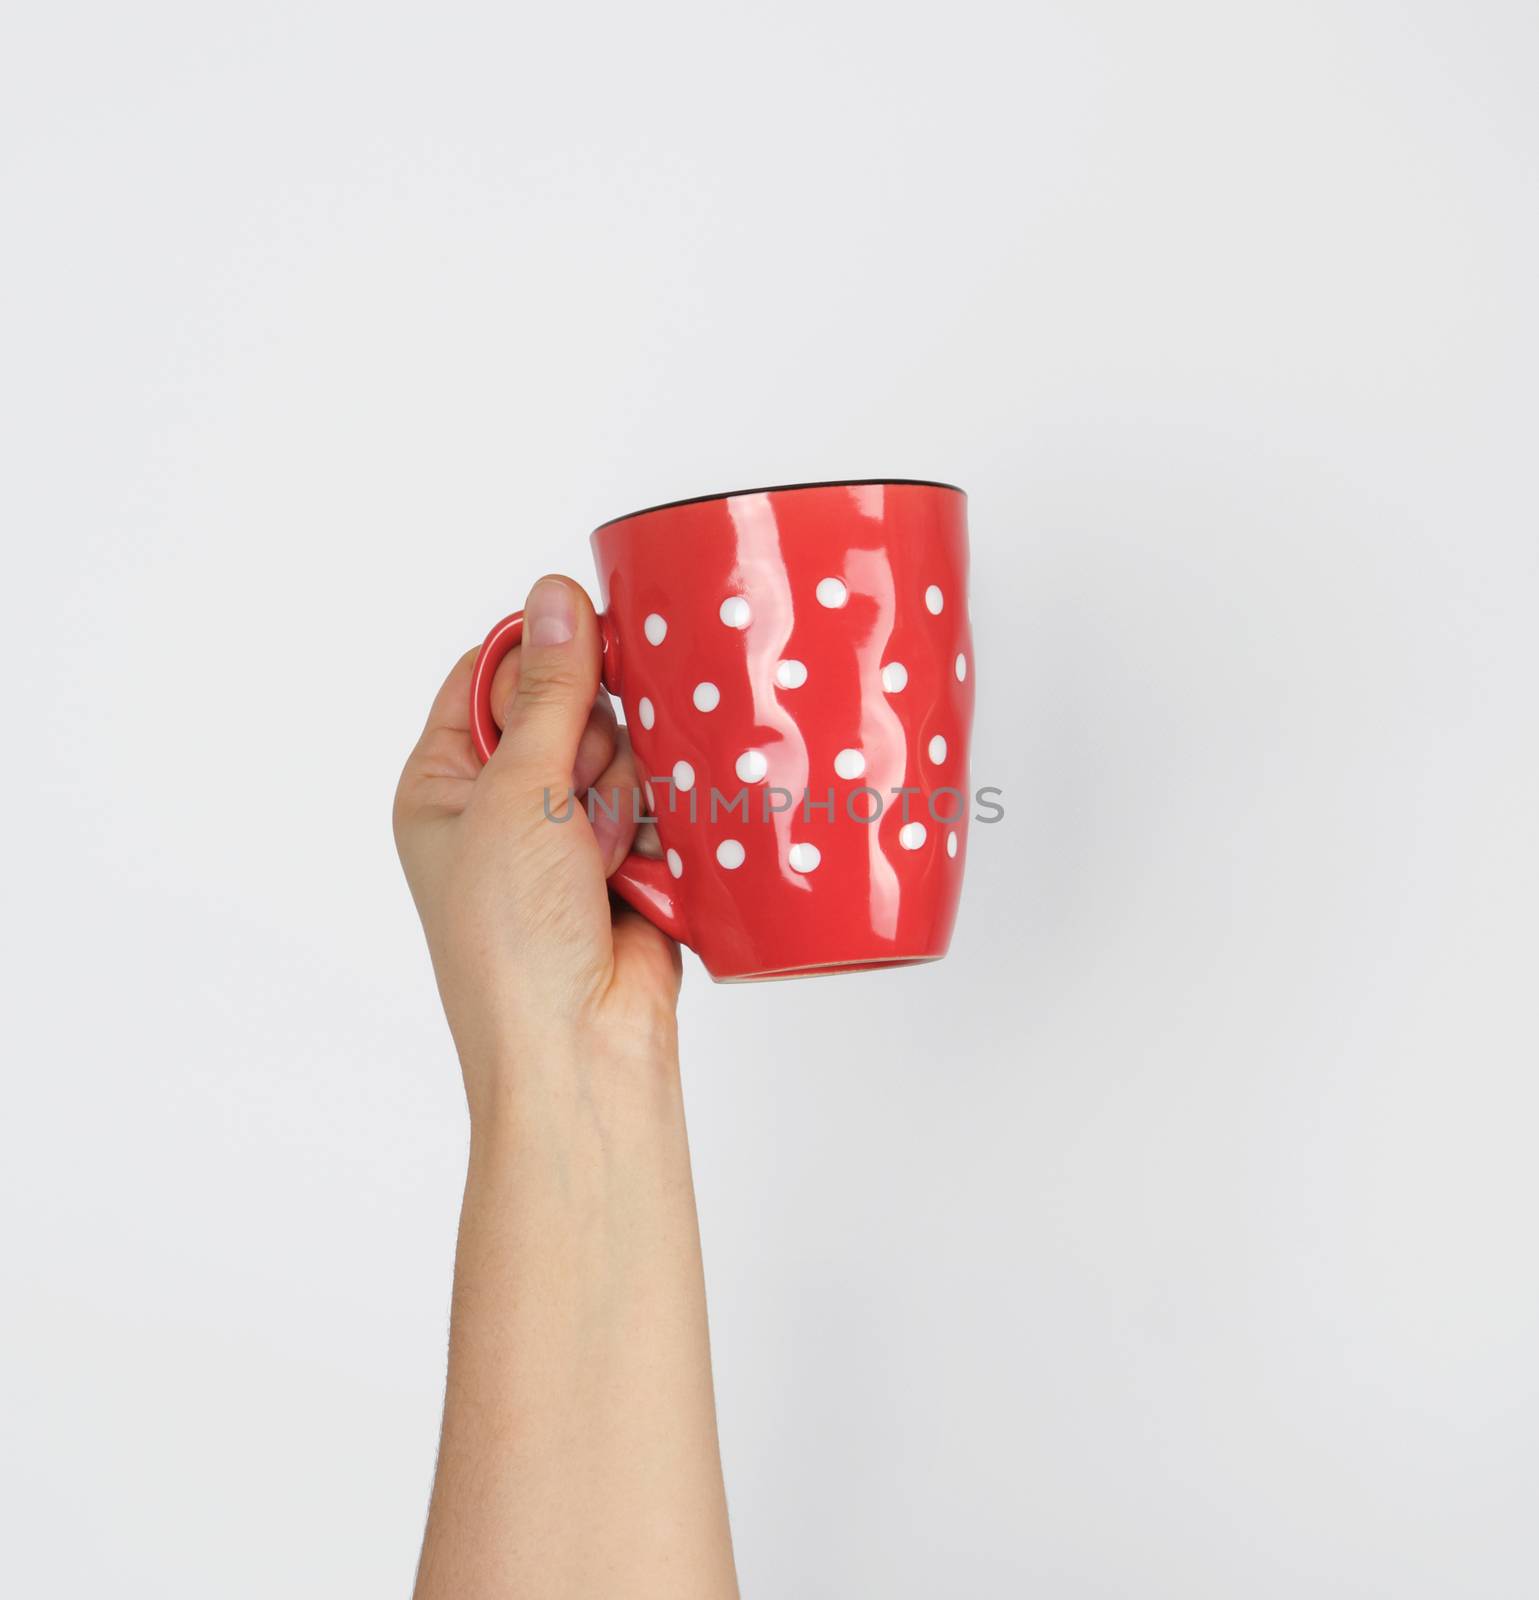 red ceramic cup in a female hand on a white background by ndanko